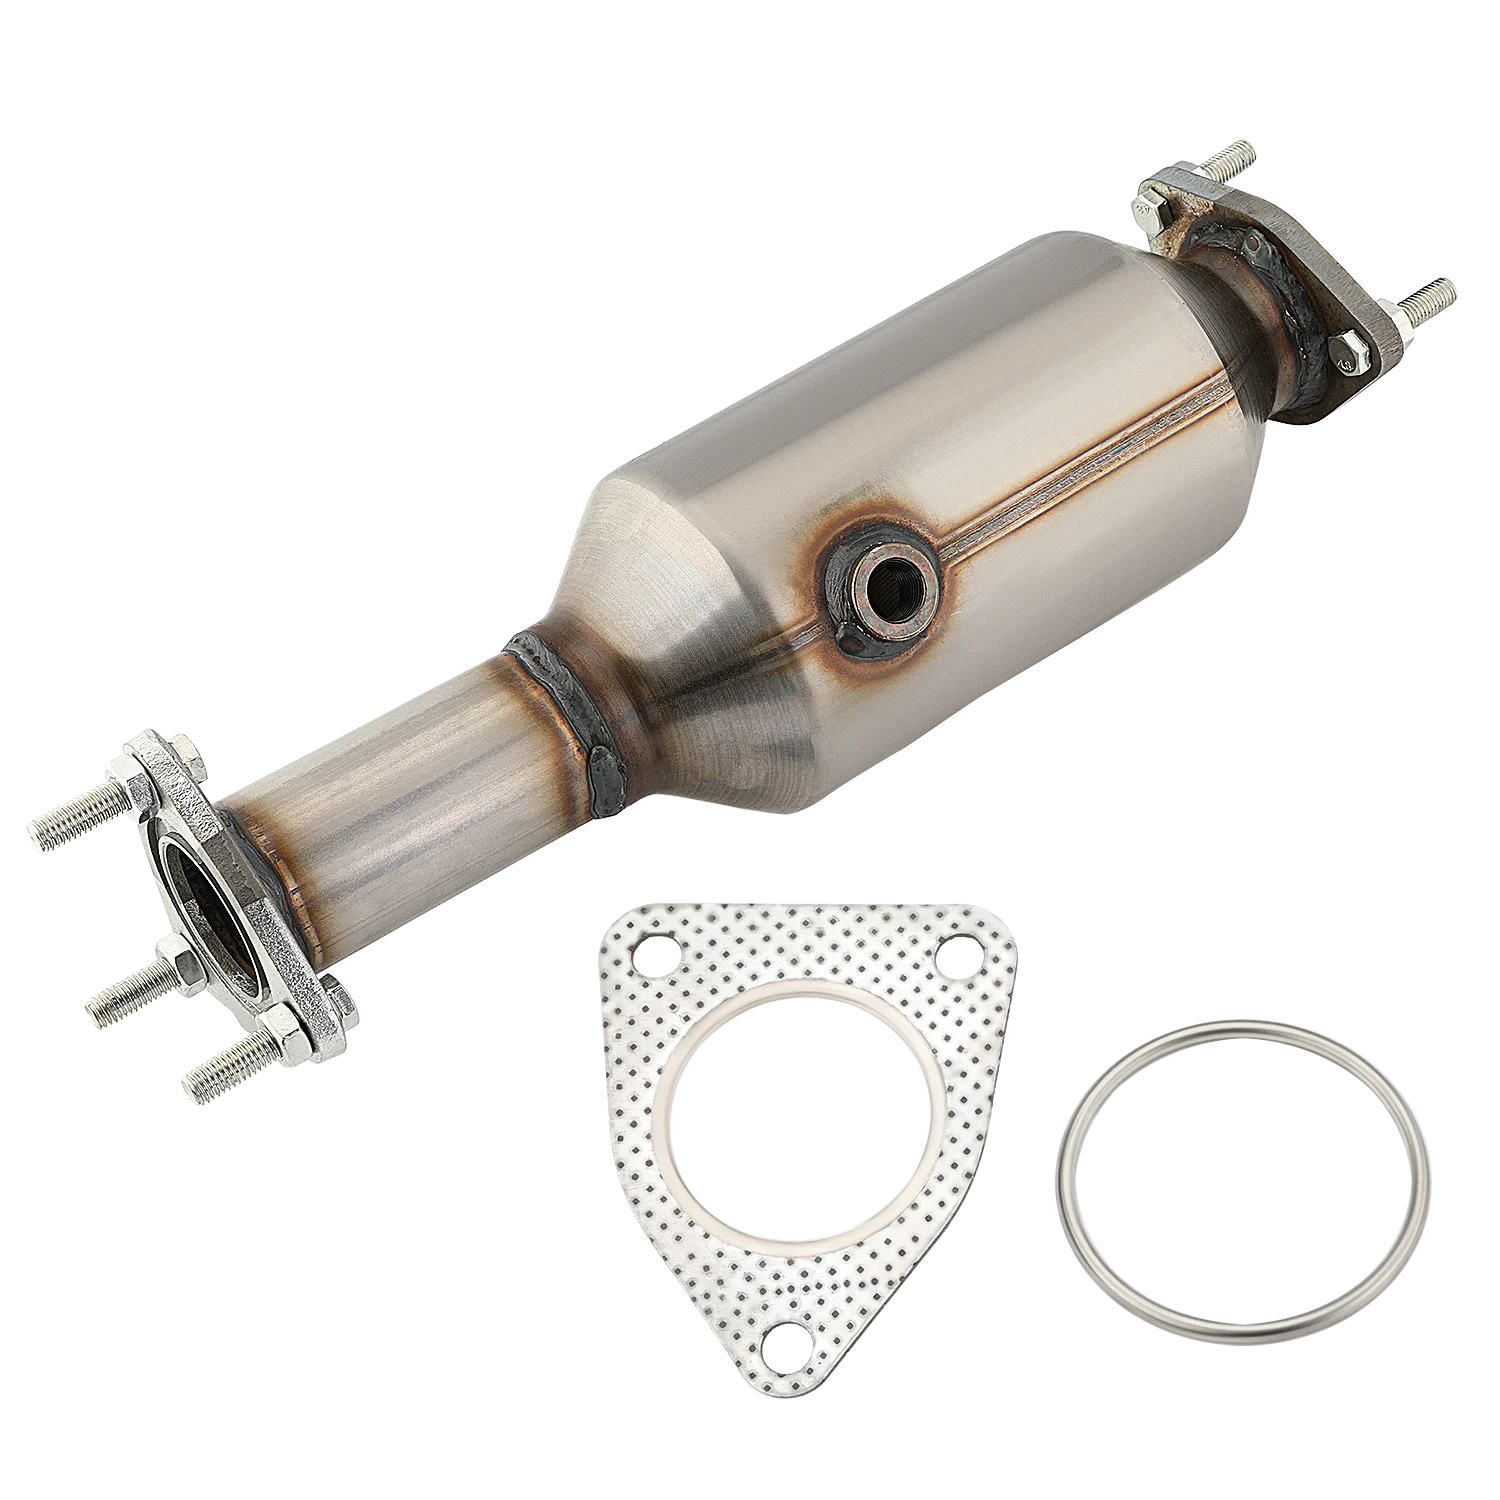 

Catalytic Converter for 1998 1999 2000 2001 2002 Honda Accord DX LX EX SE Value Package Sedan 2.3L 4cyl Exhaust Systems Mufflers